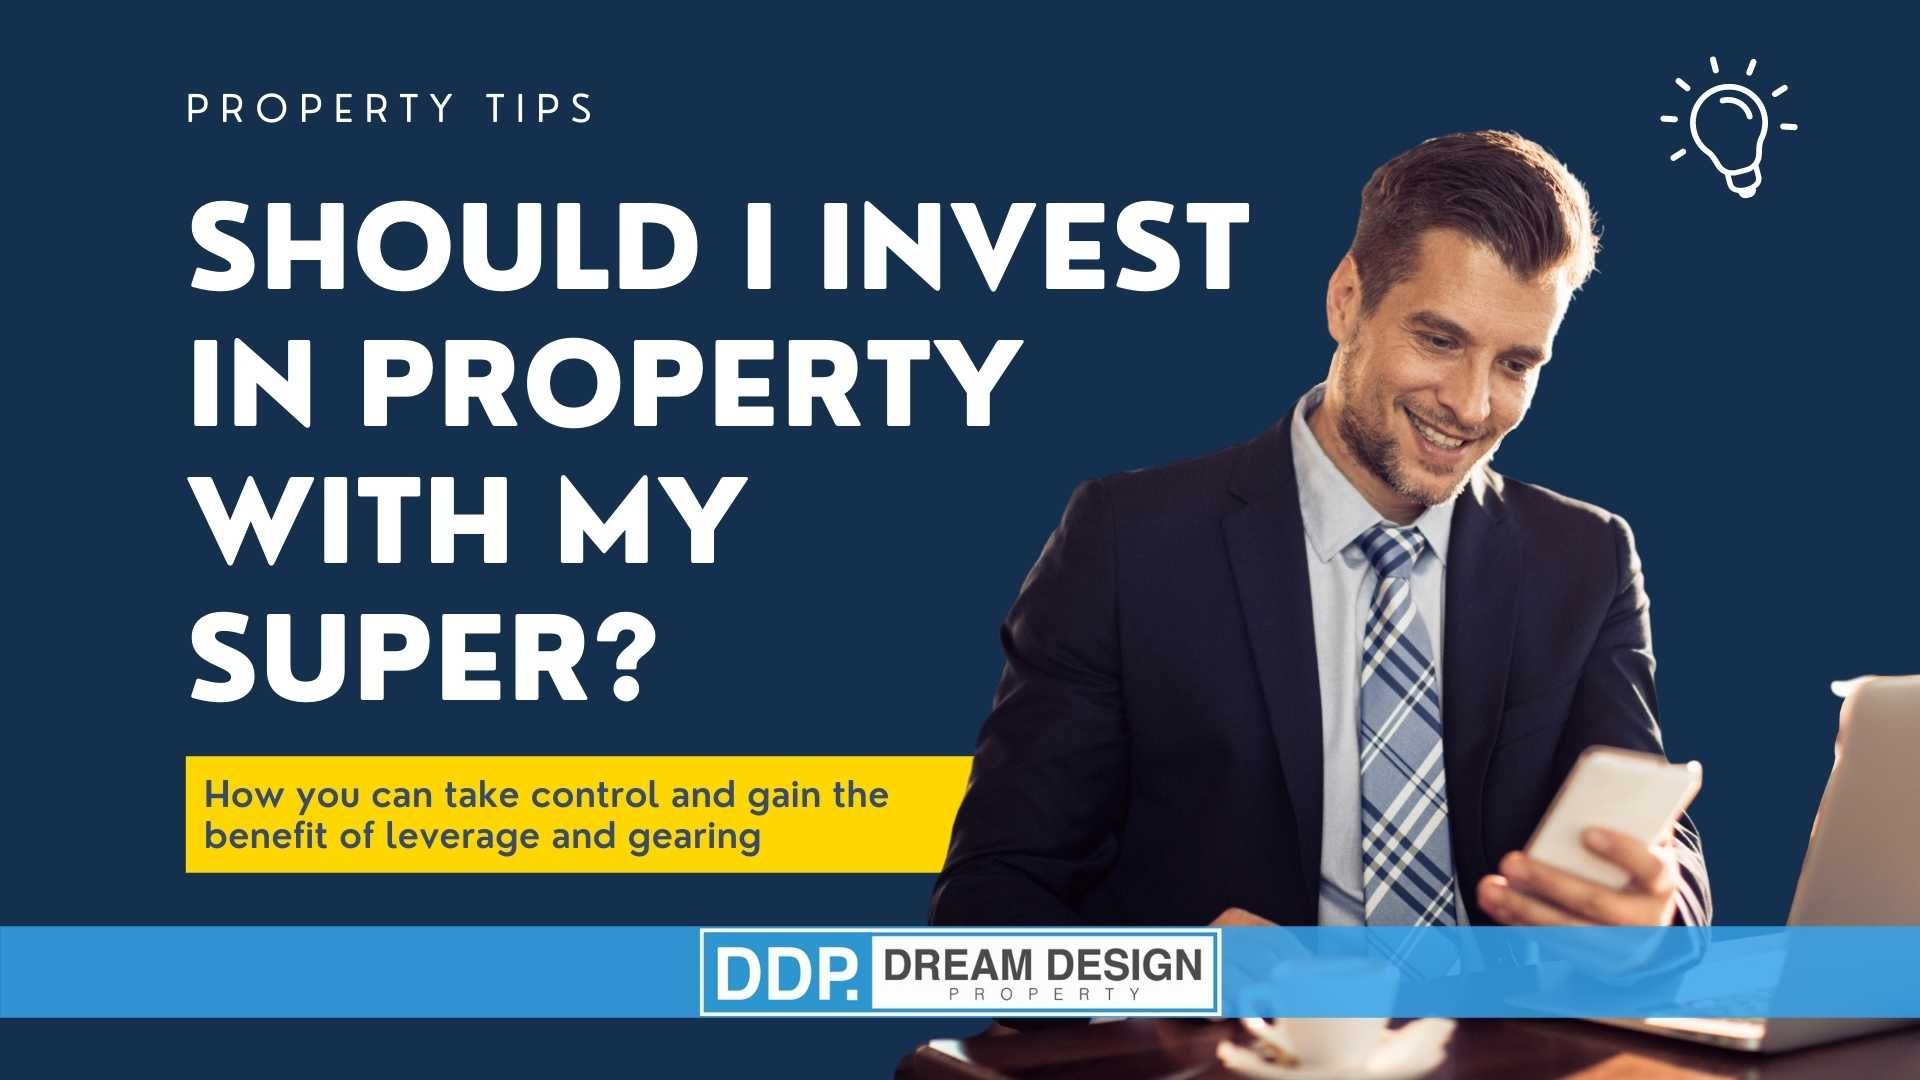 Did you know you can use super to buy property?